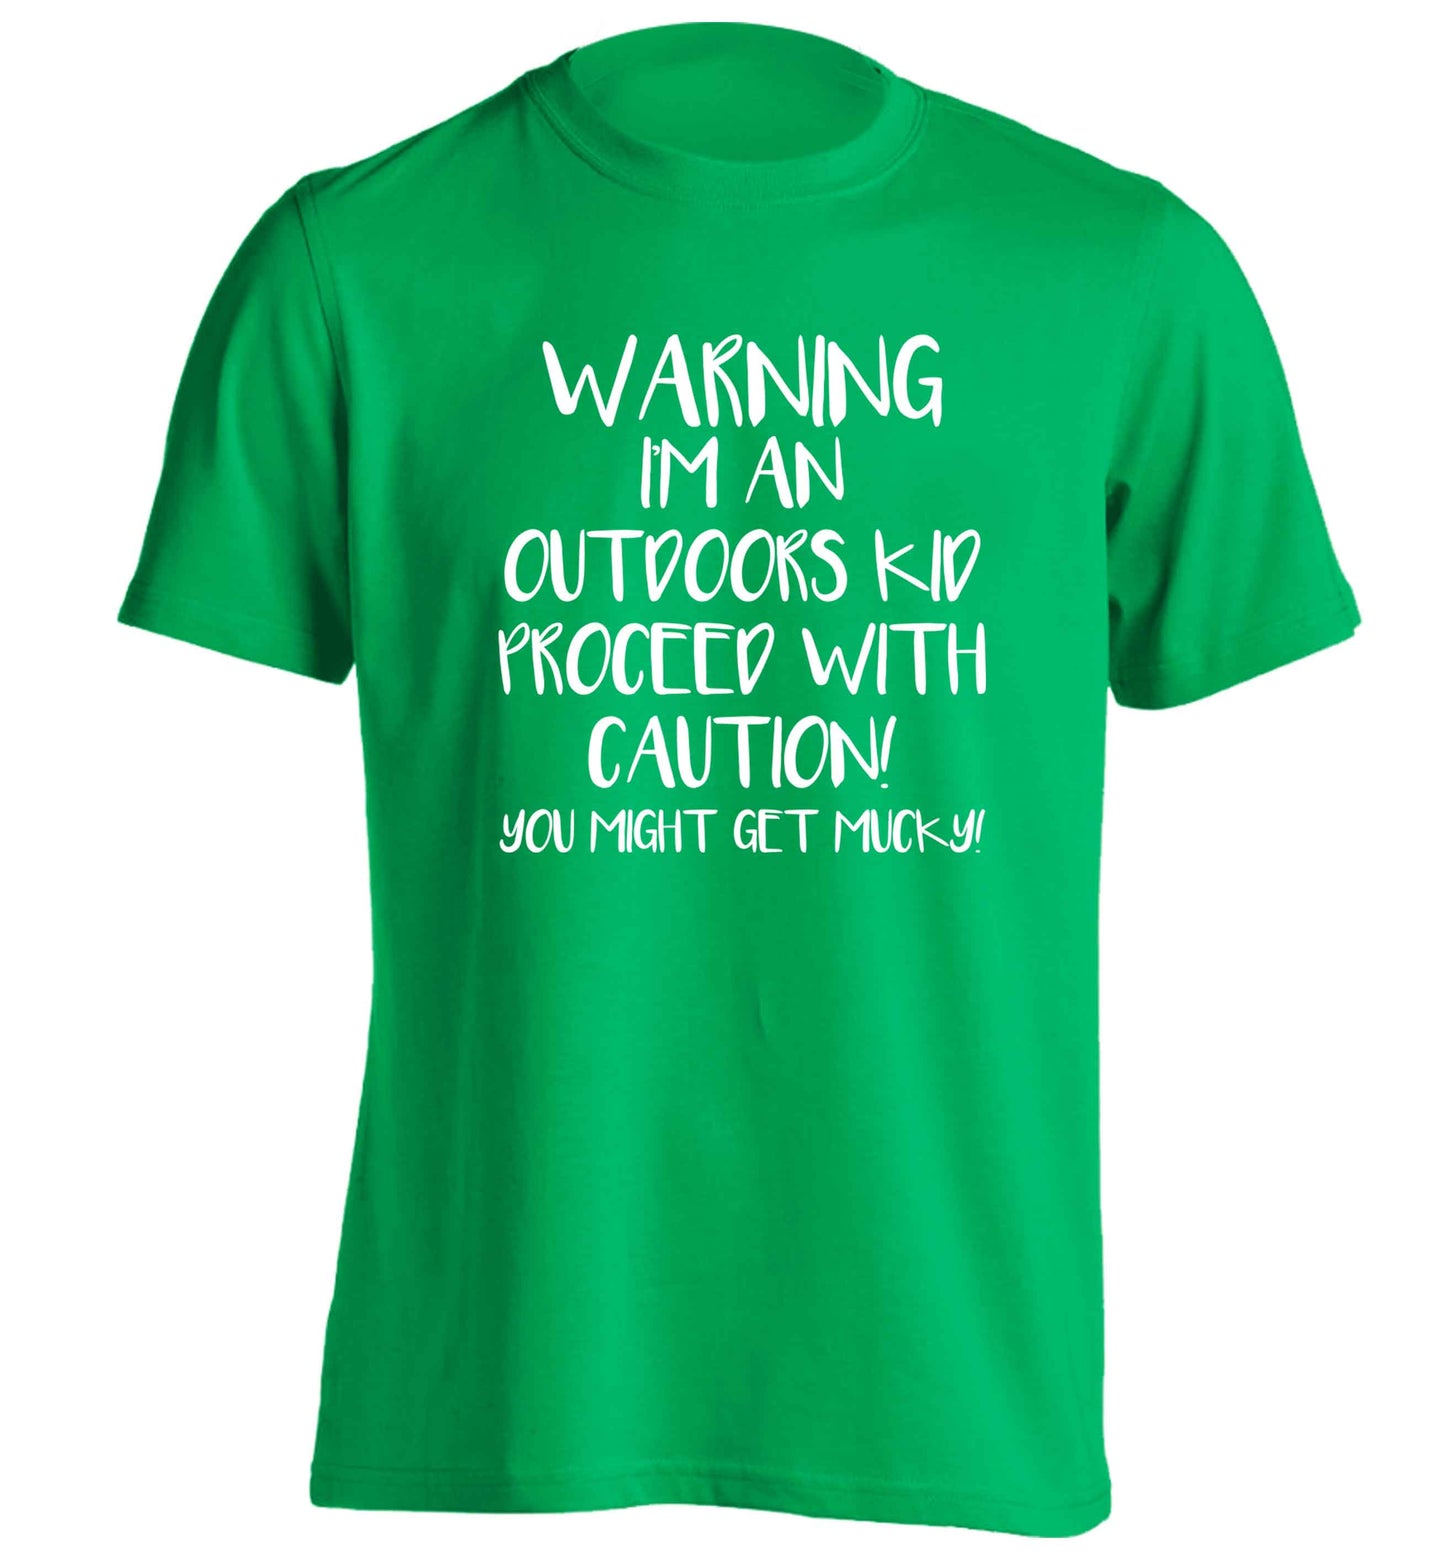 Warning I'm an outdoors kid! Proceed with caution you might get mucky adults unisex green Tshirt 2XL